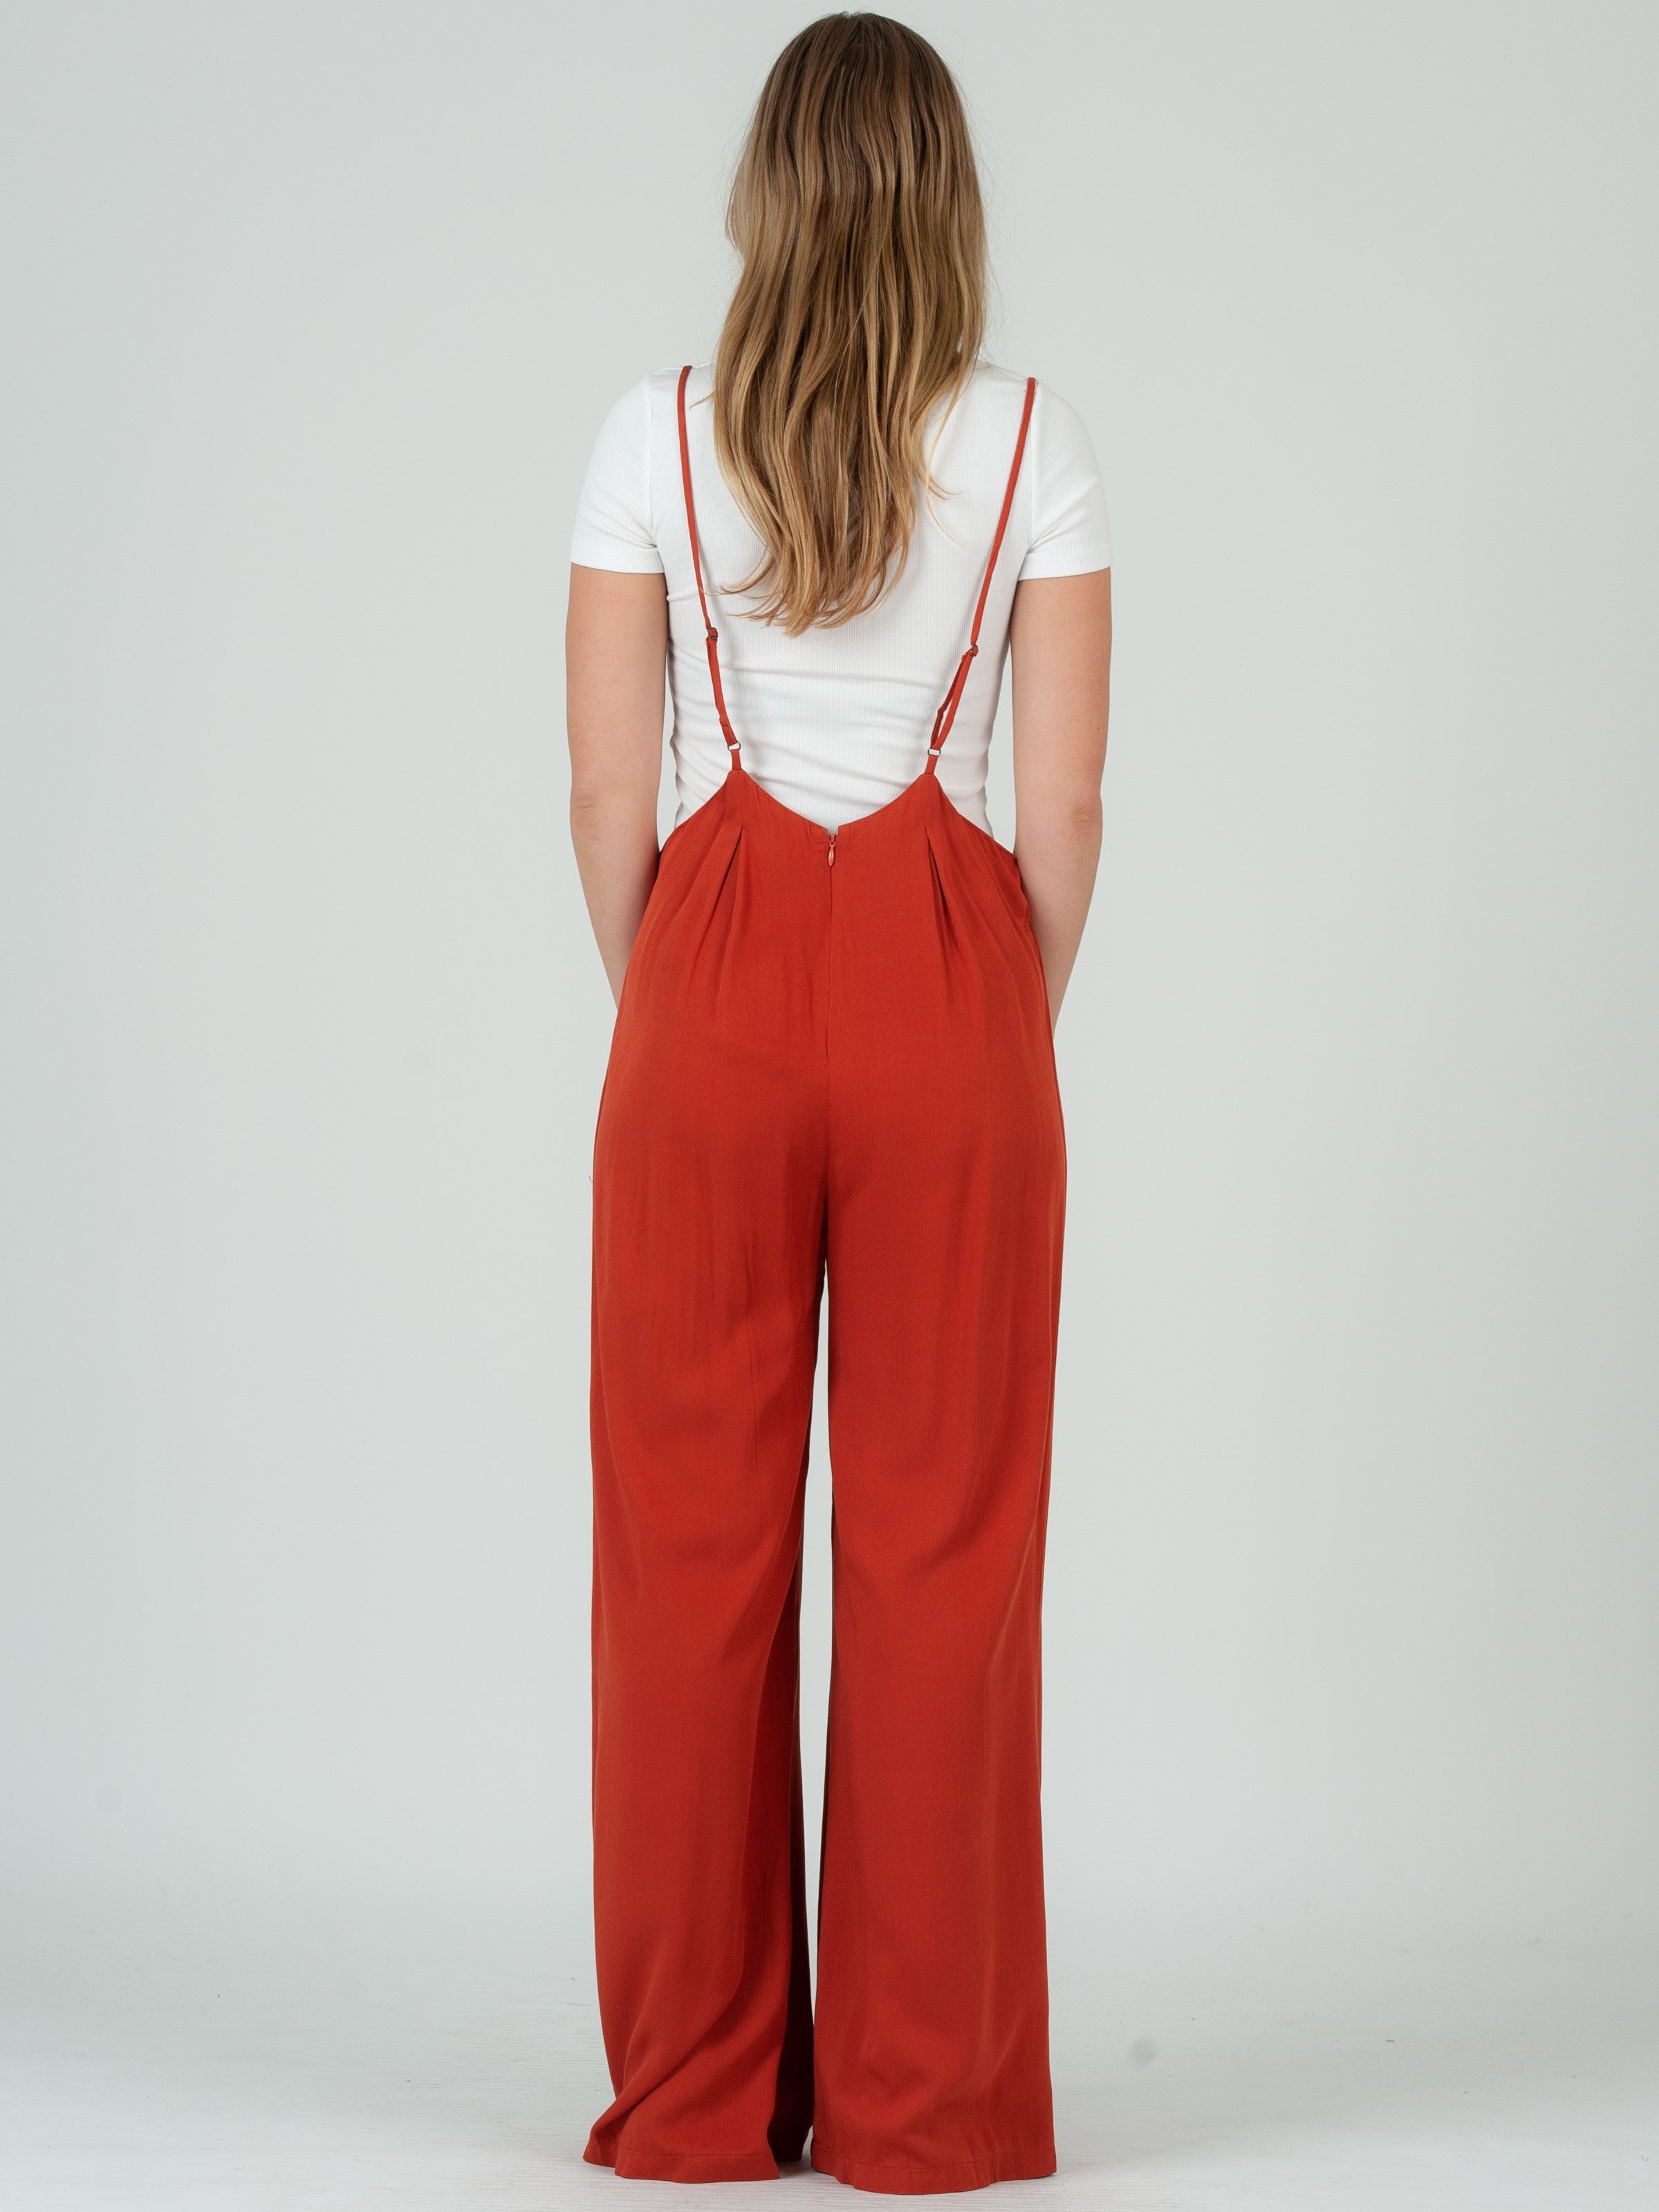 Go Beyond the Seams with The Saylor High-Waisted Pants Free Sewing Pattern